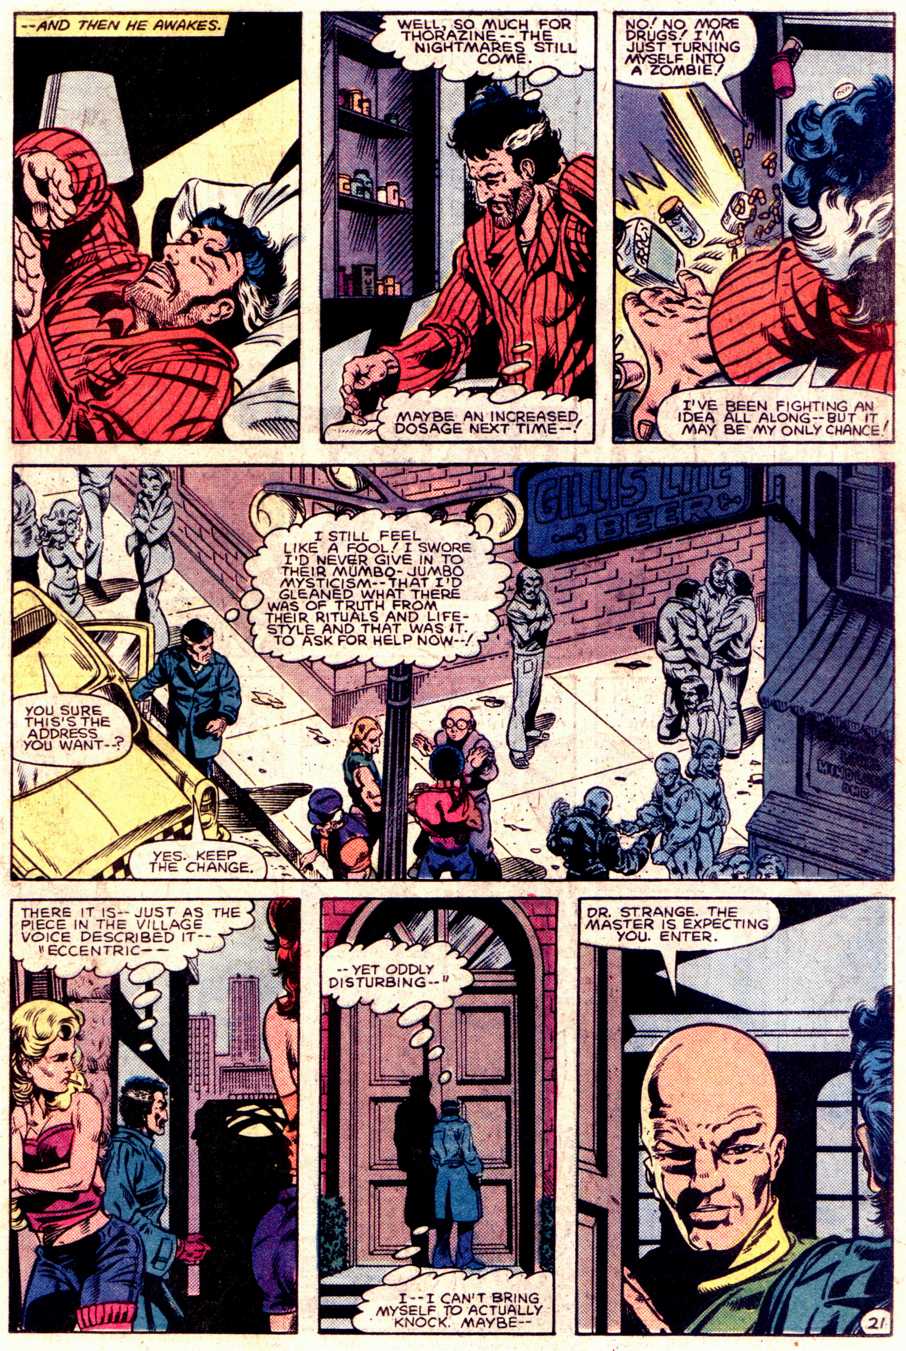 What If? (1977) issue 40 - Dr Strange had not become master of The mystic arts - Page 22